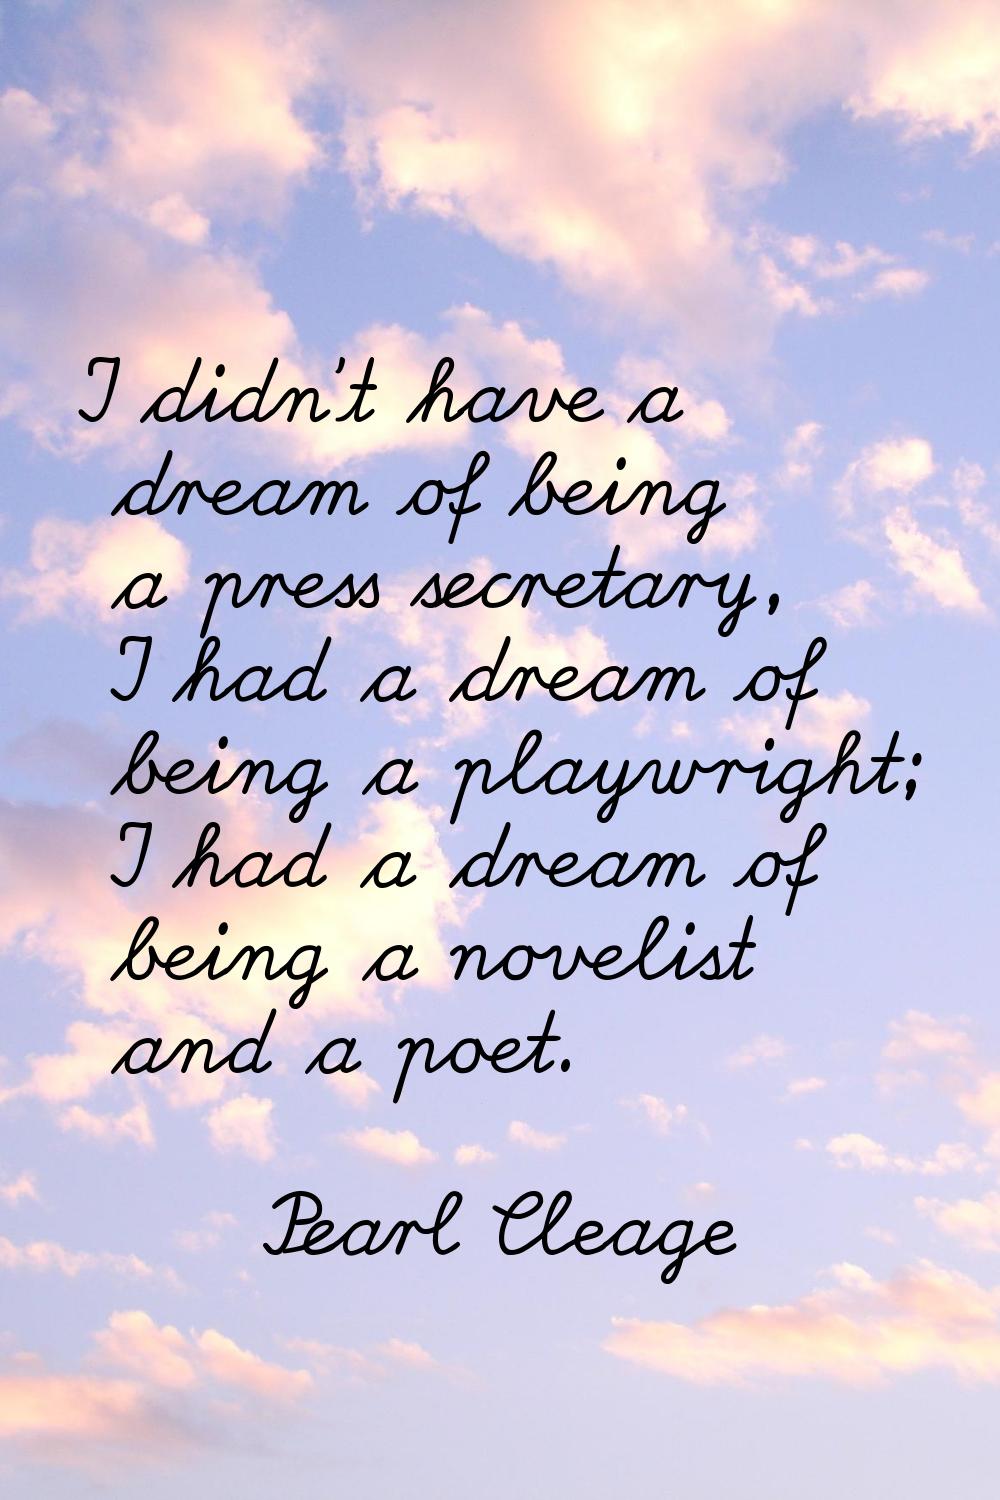 I didn't have a dream of being a press secretary, I had a dream of being a playwright; I had a drea